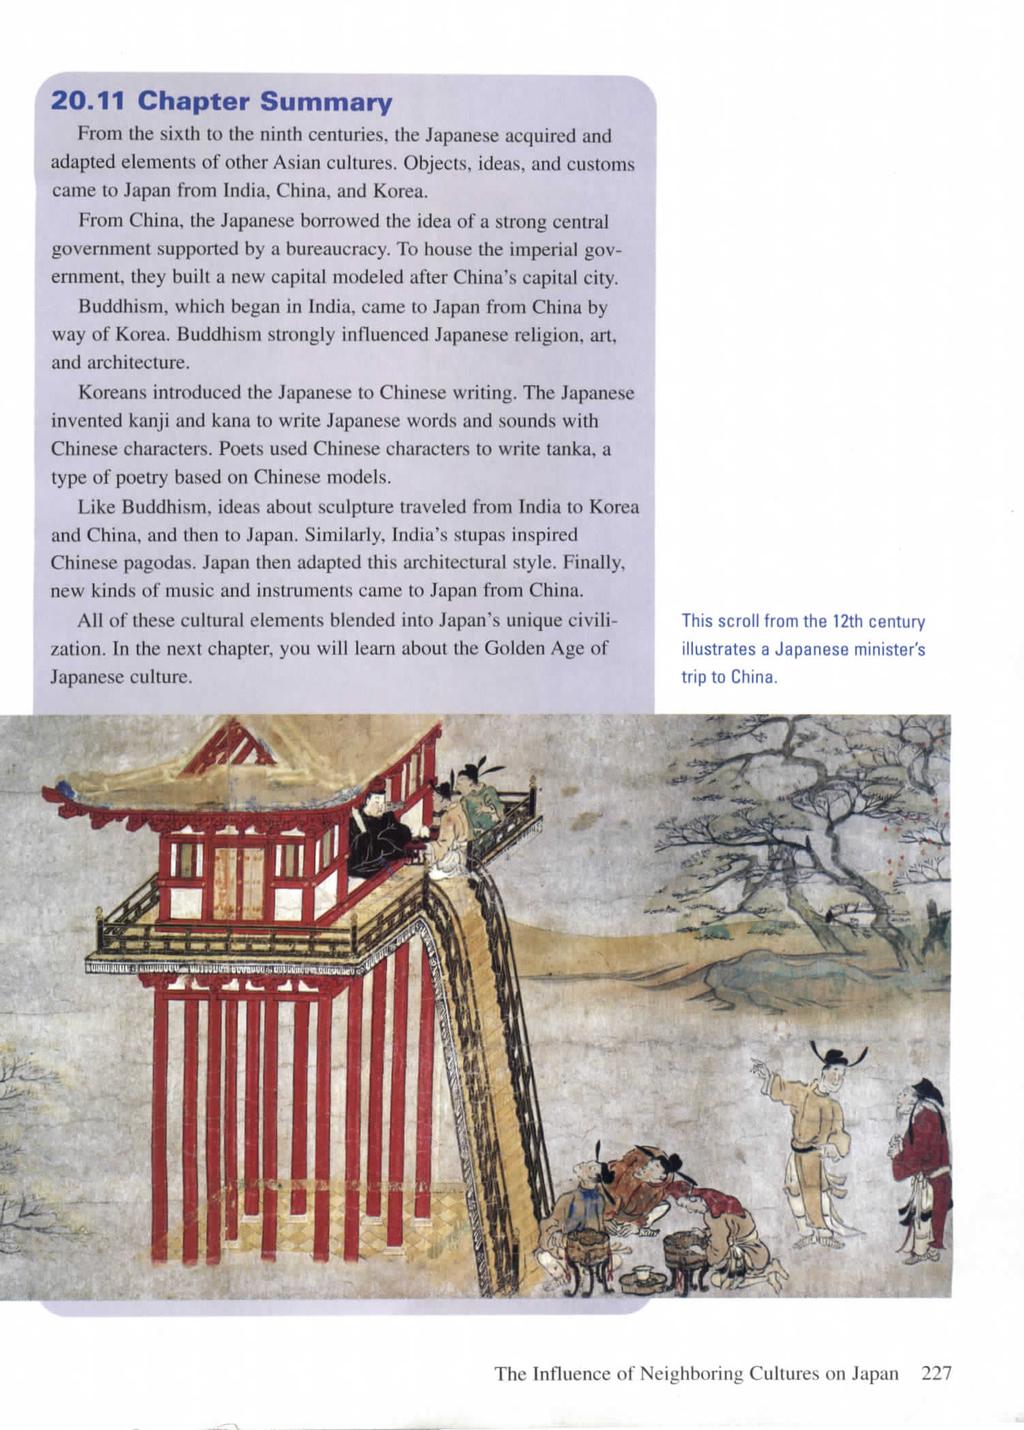 20.11 Chapter Summary From the sixth to the ninth centuries, the Japanese acquired and adapted elements of other Asian cultures. Objects, ideas, and customs came to Japan from India, China, and Korea.